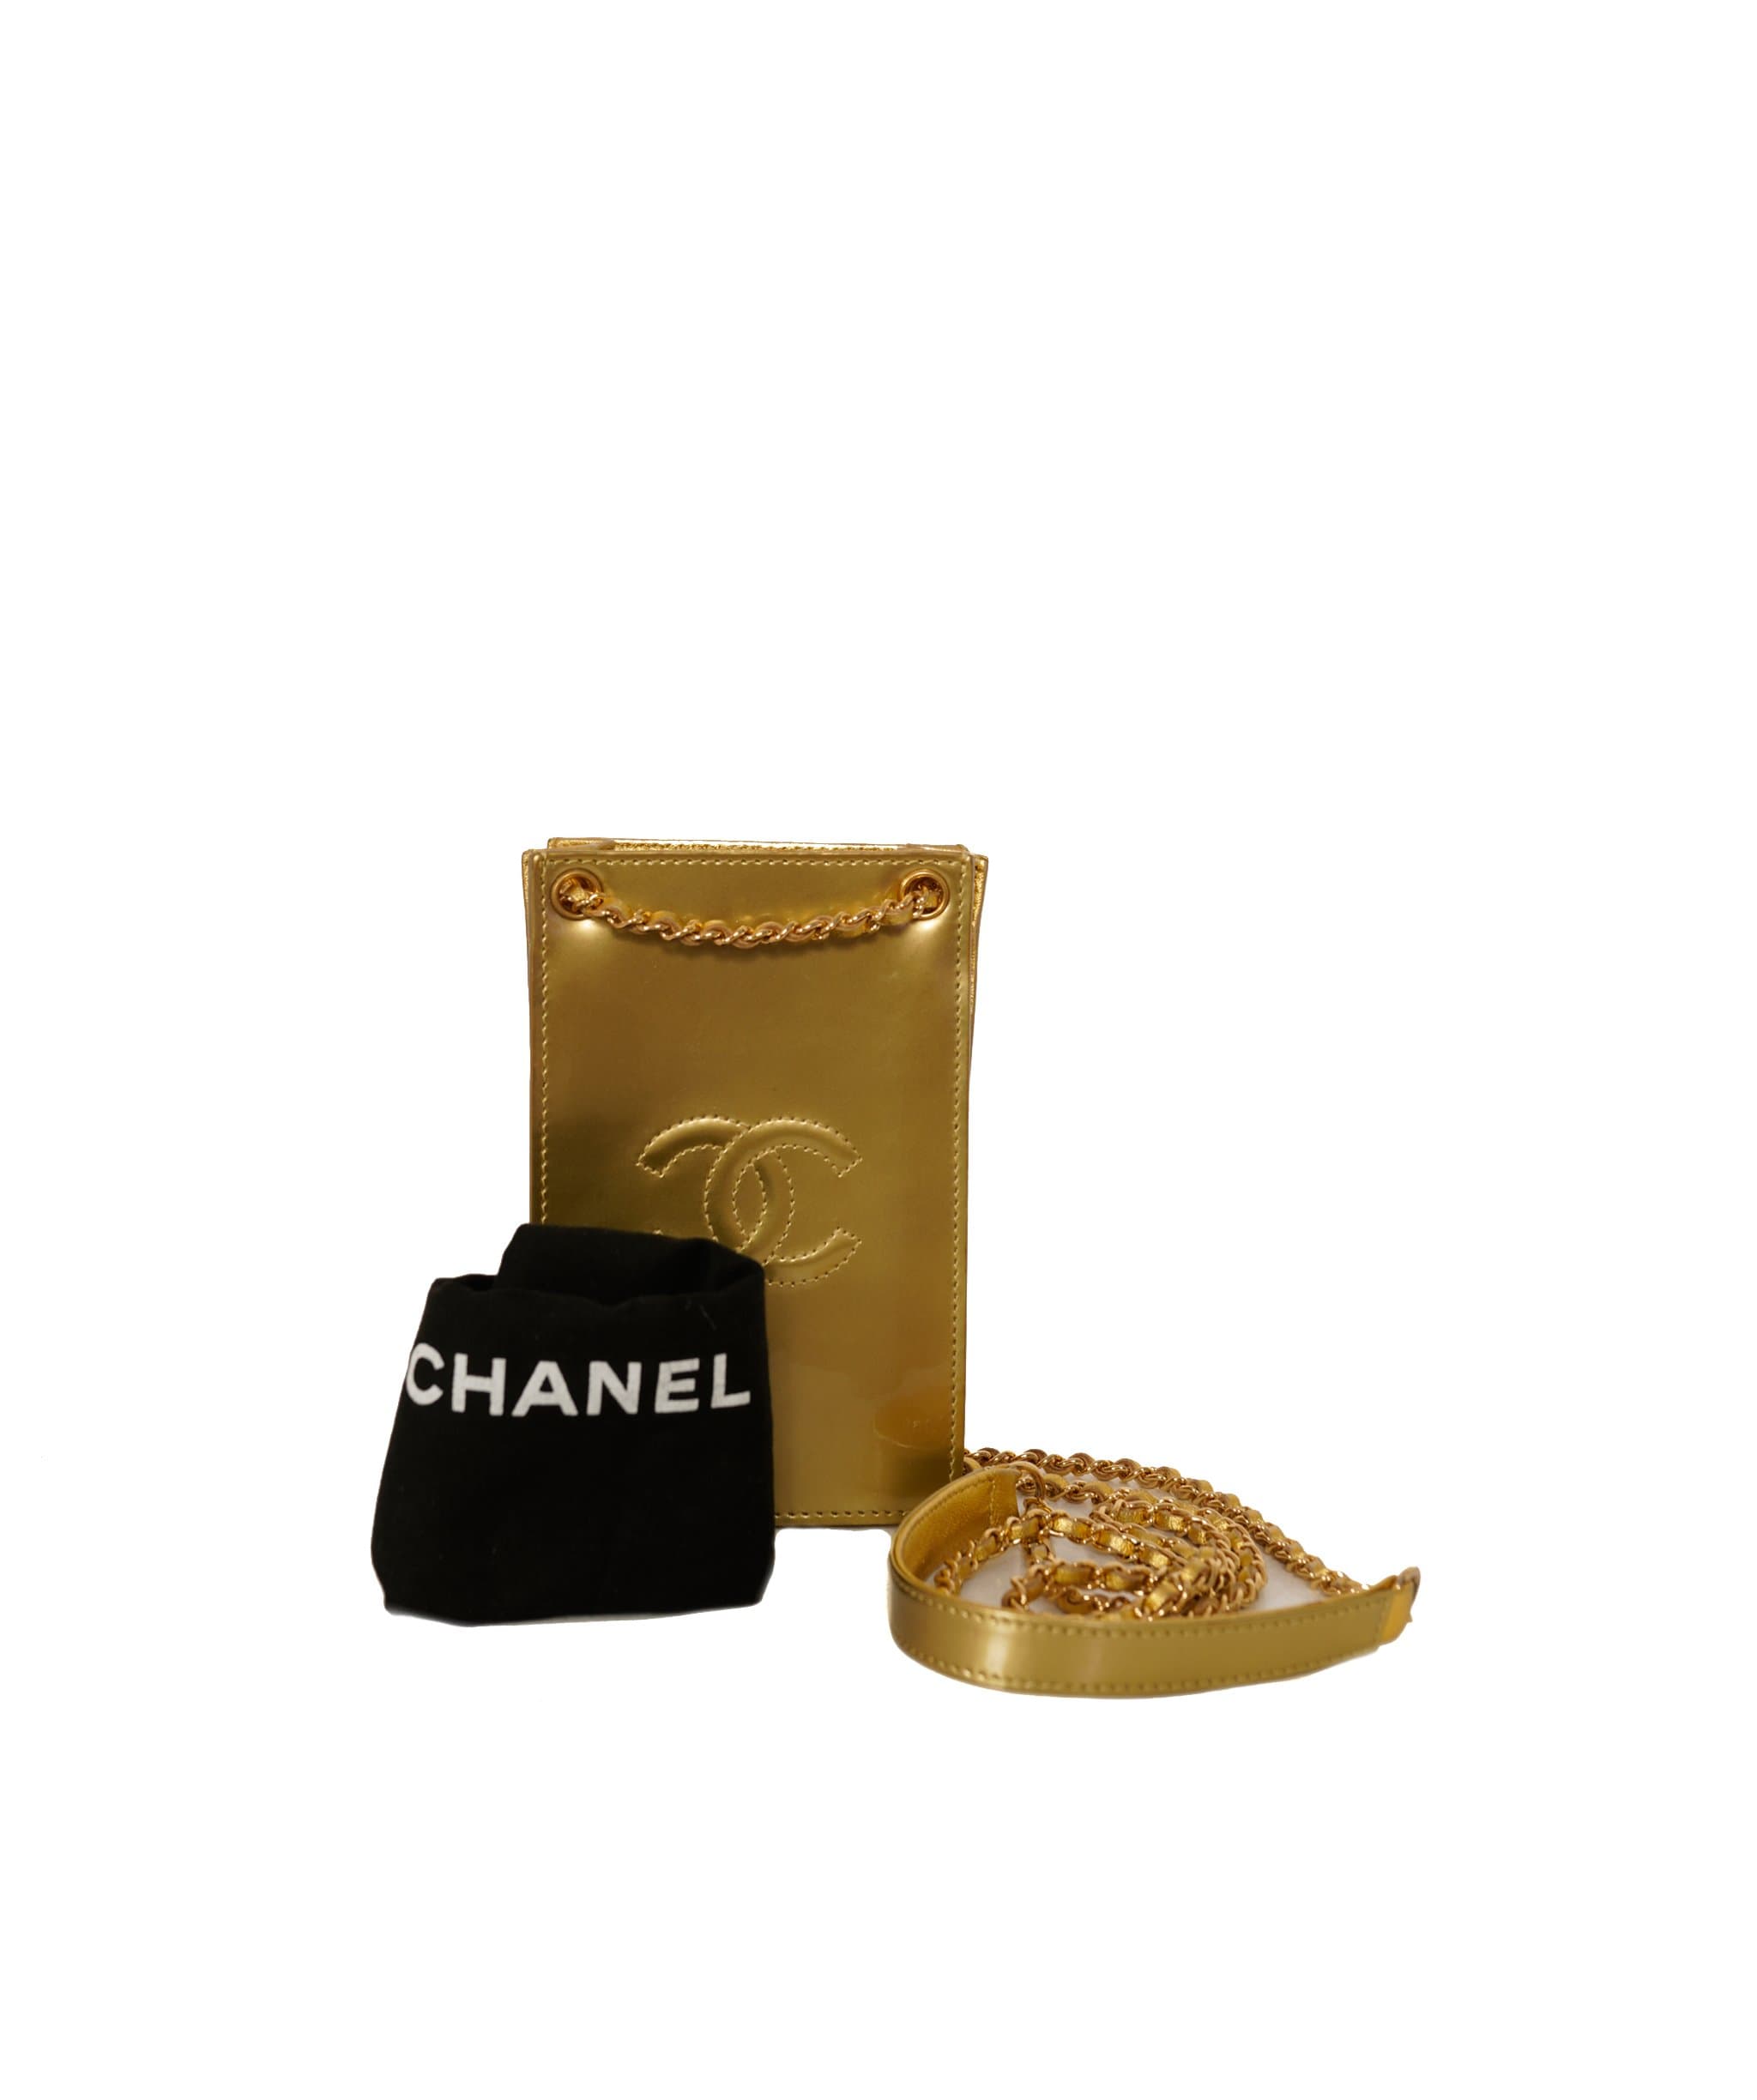 Chanel Chanel CC Gold Phone Case and Bag - AWL1447